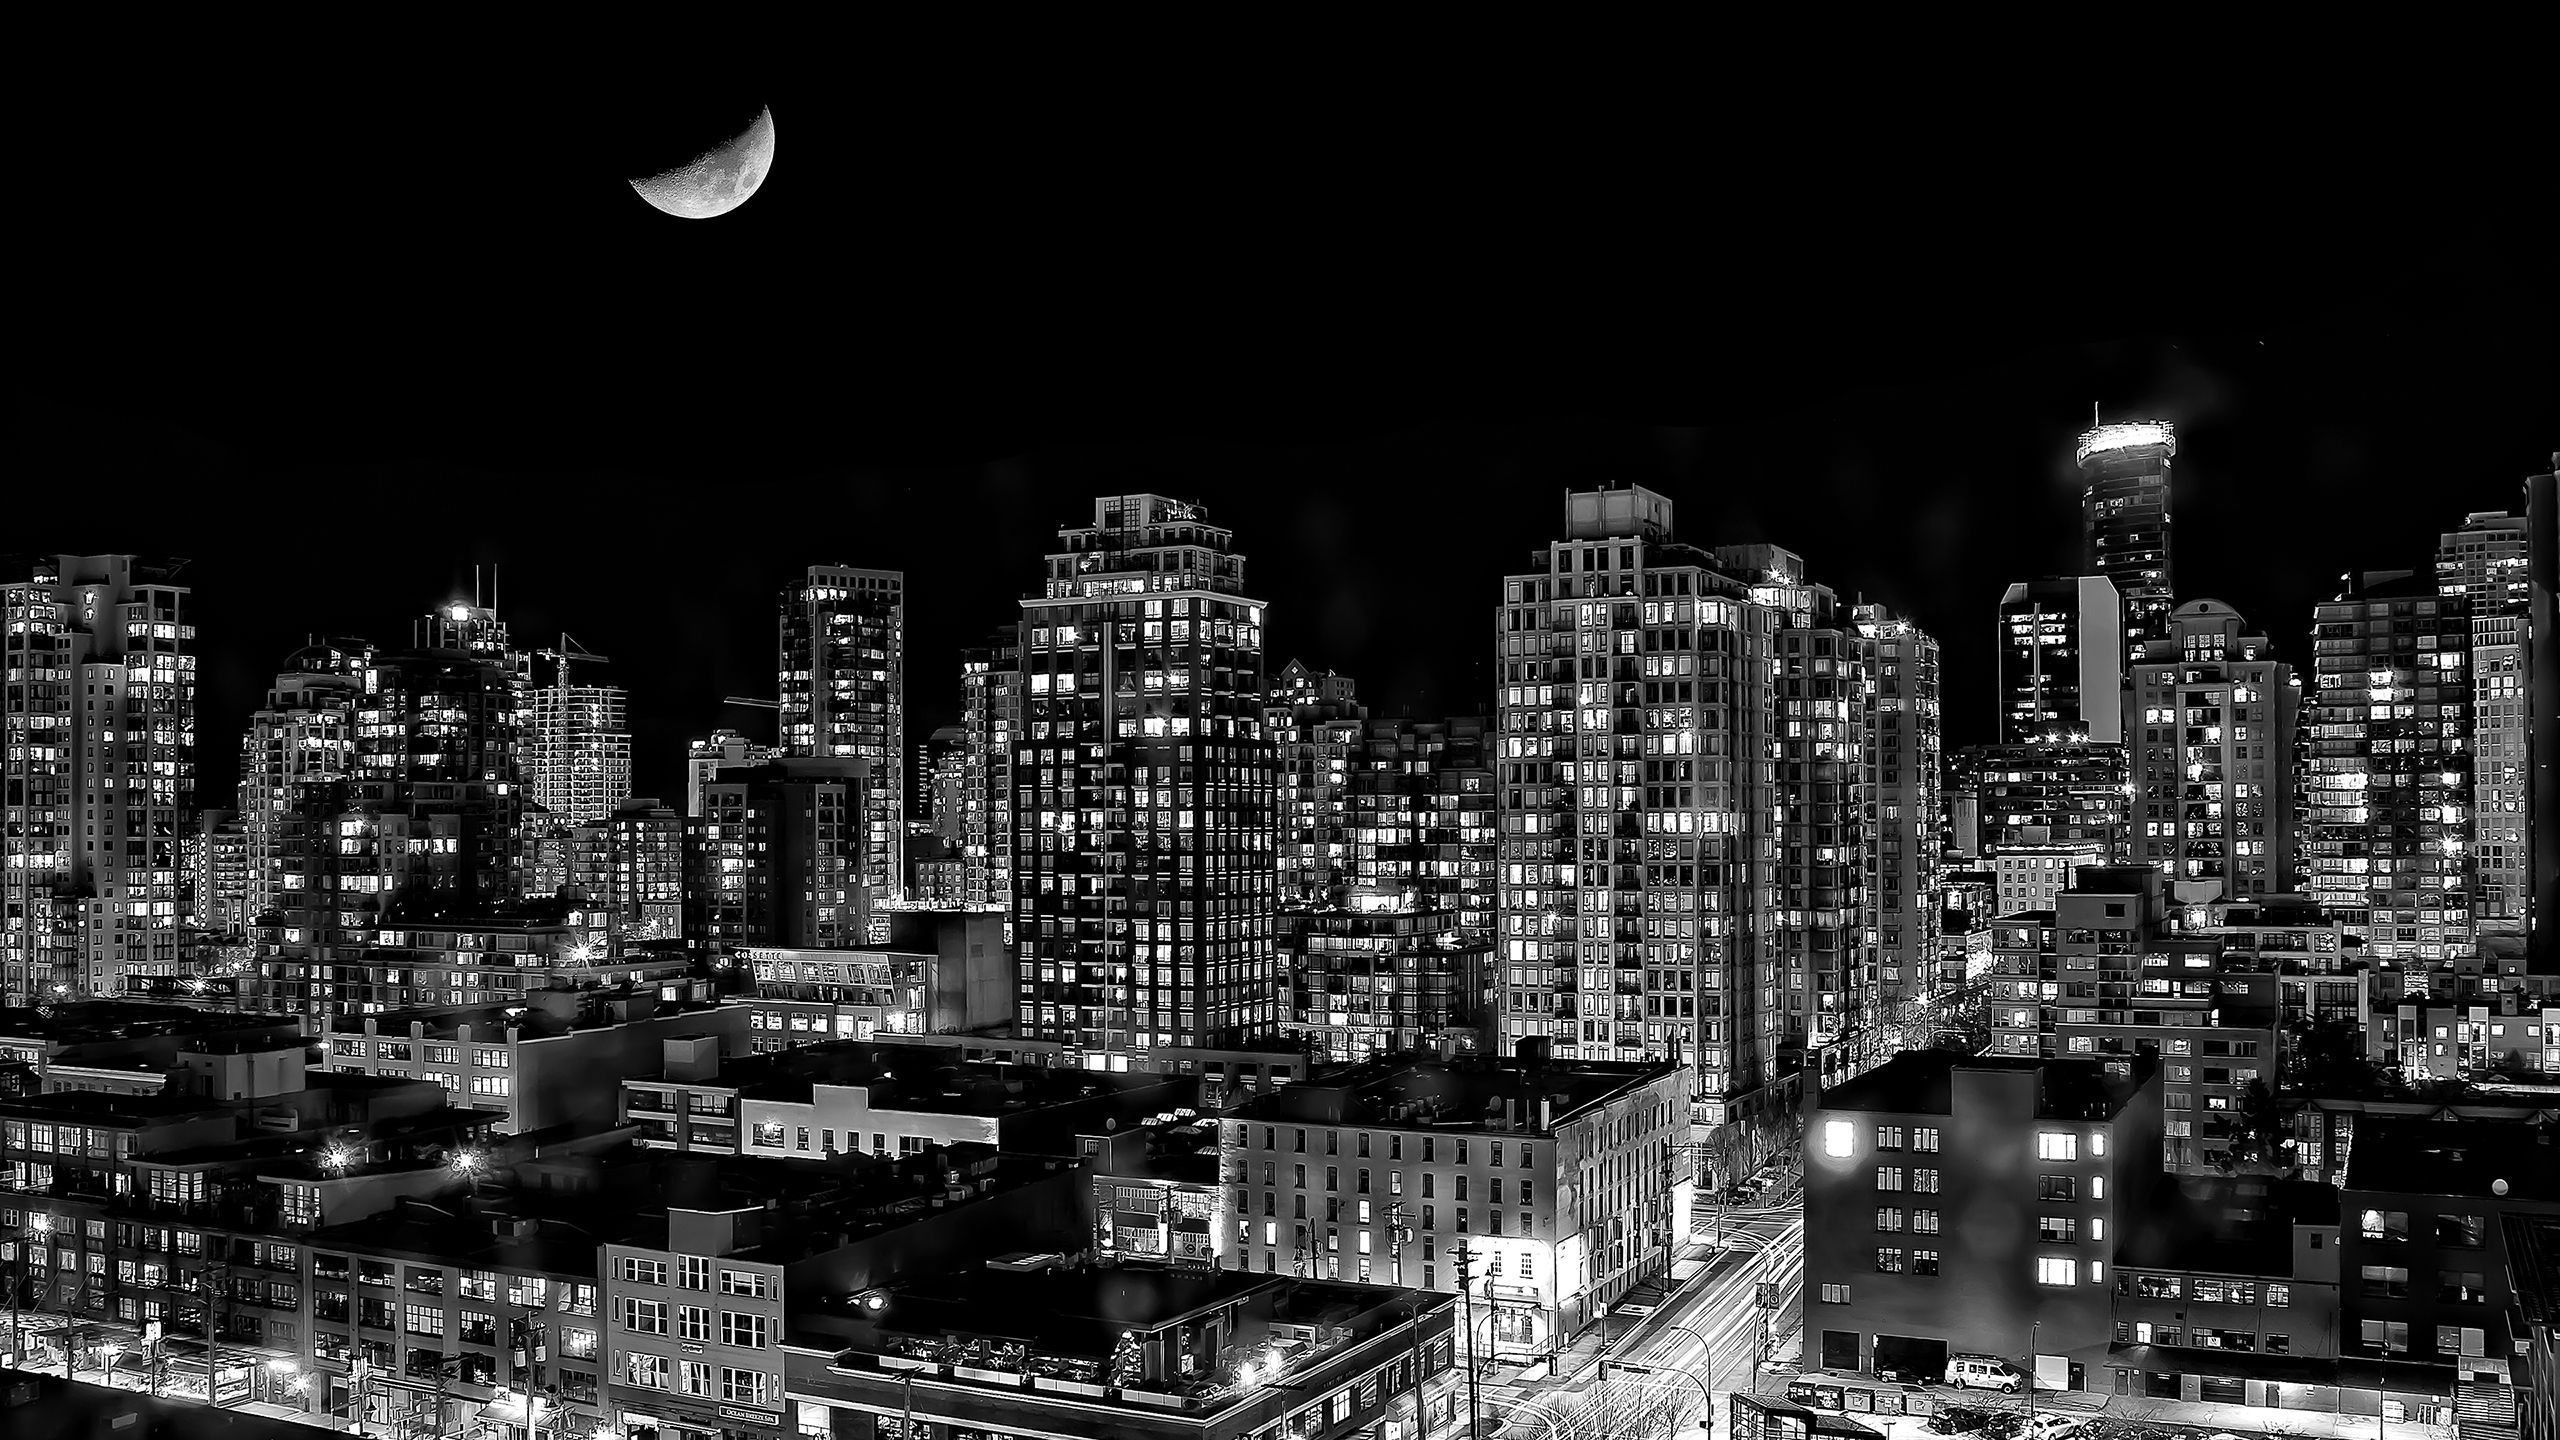 A black and white photo of a city at night with a half moon in the sky. - 2560x1440